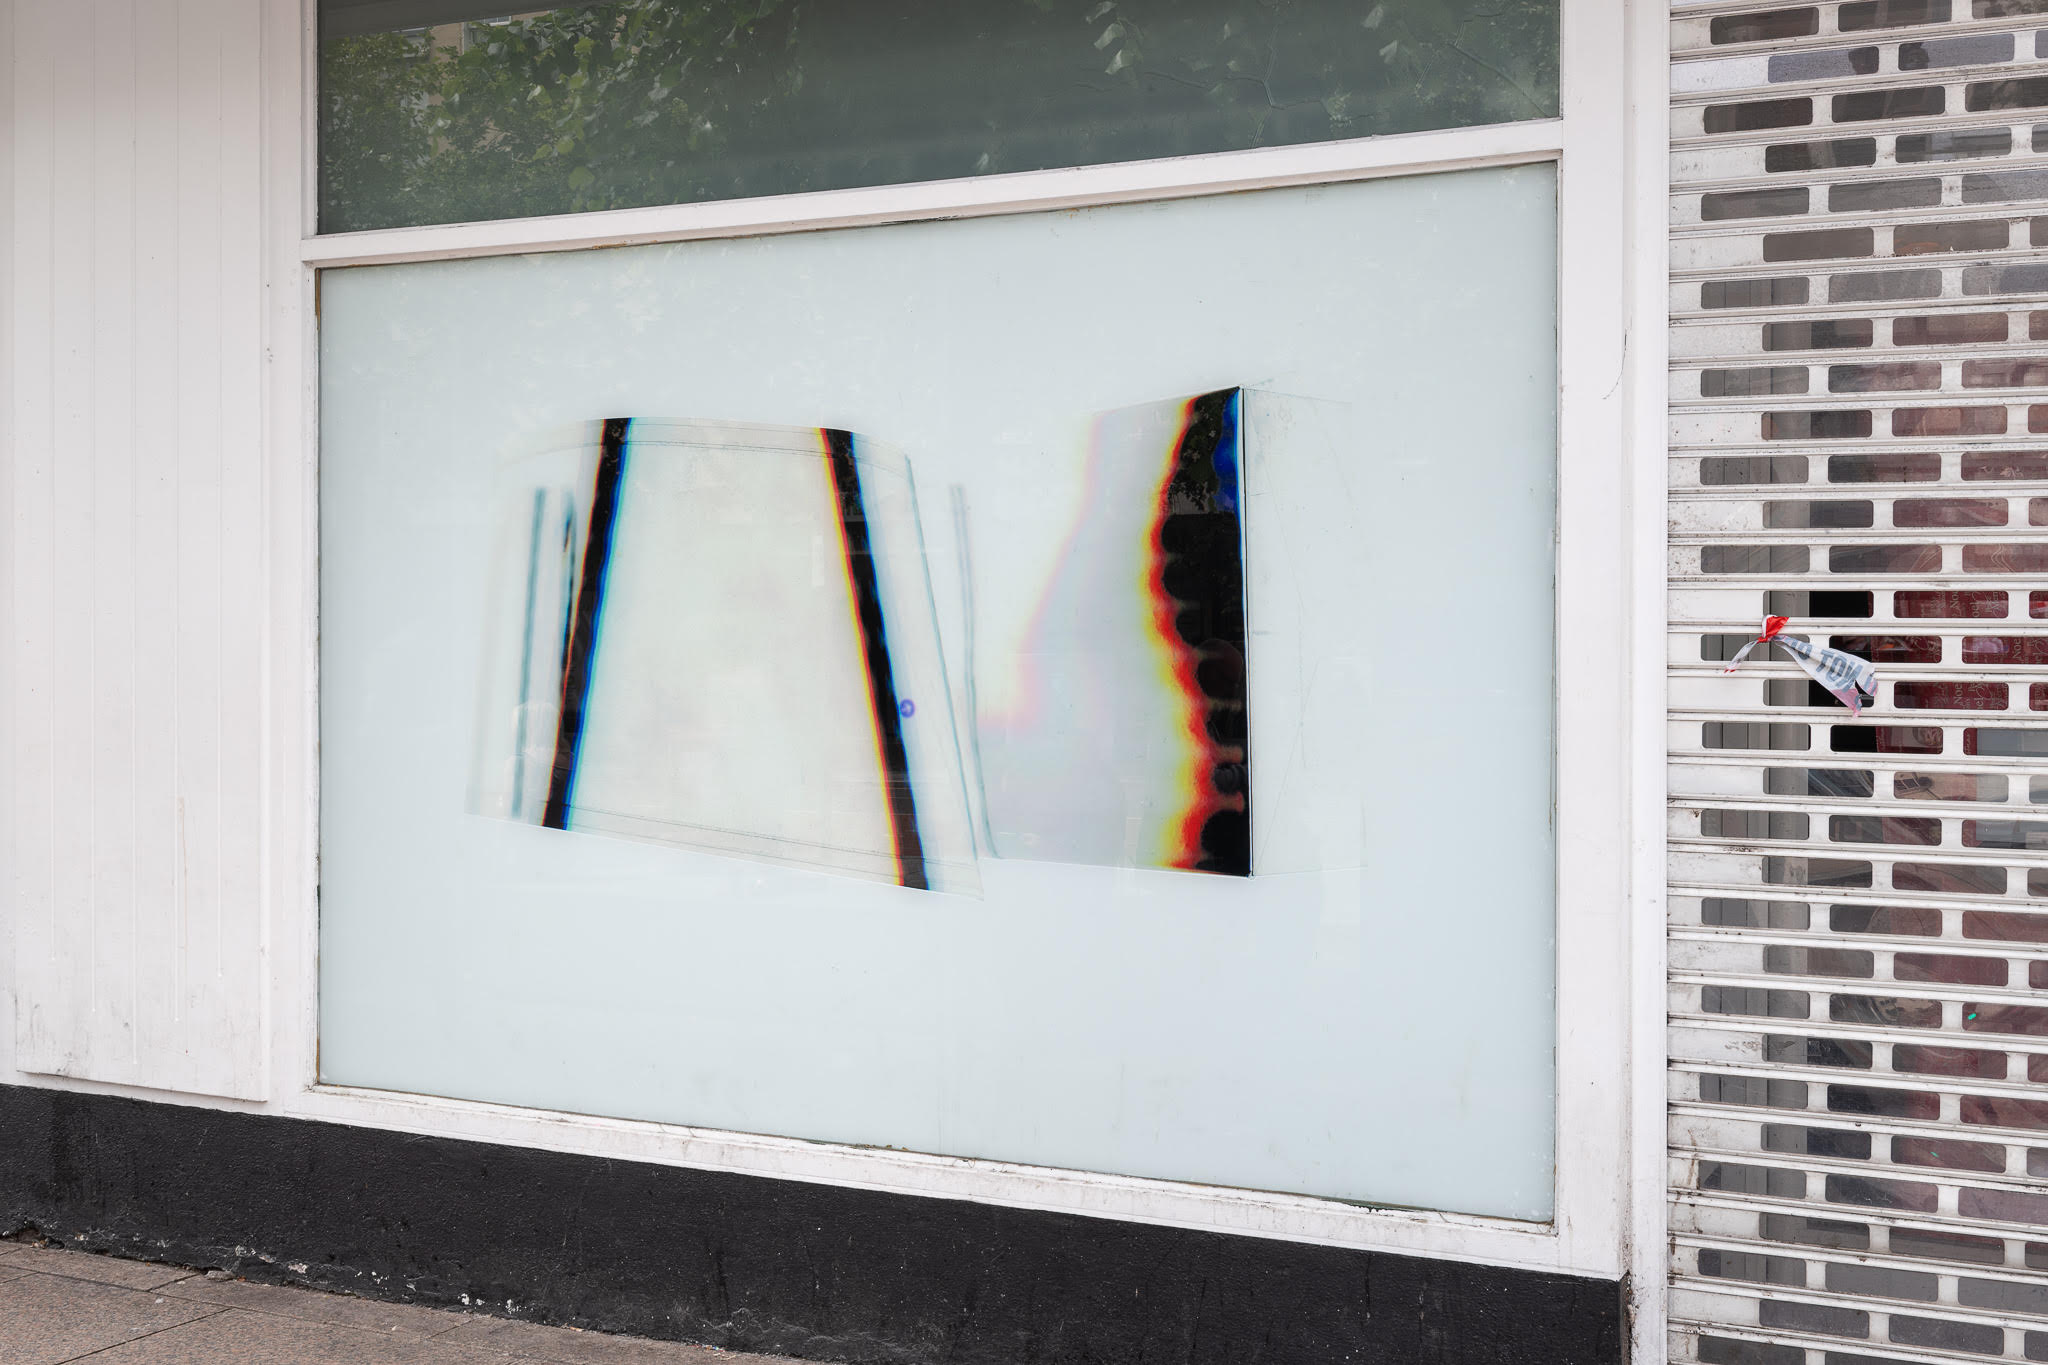 Photograph of the define silver lining installation displayed in shop windows